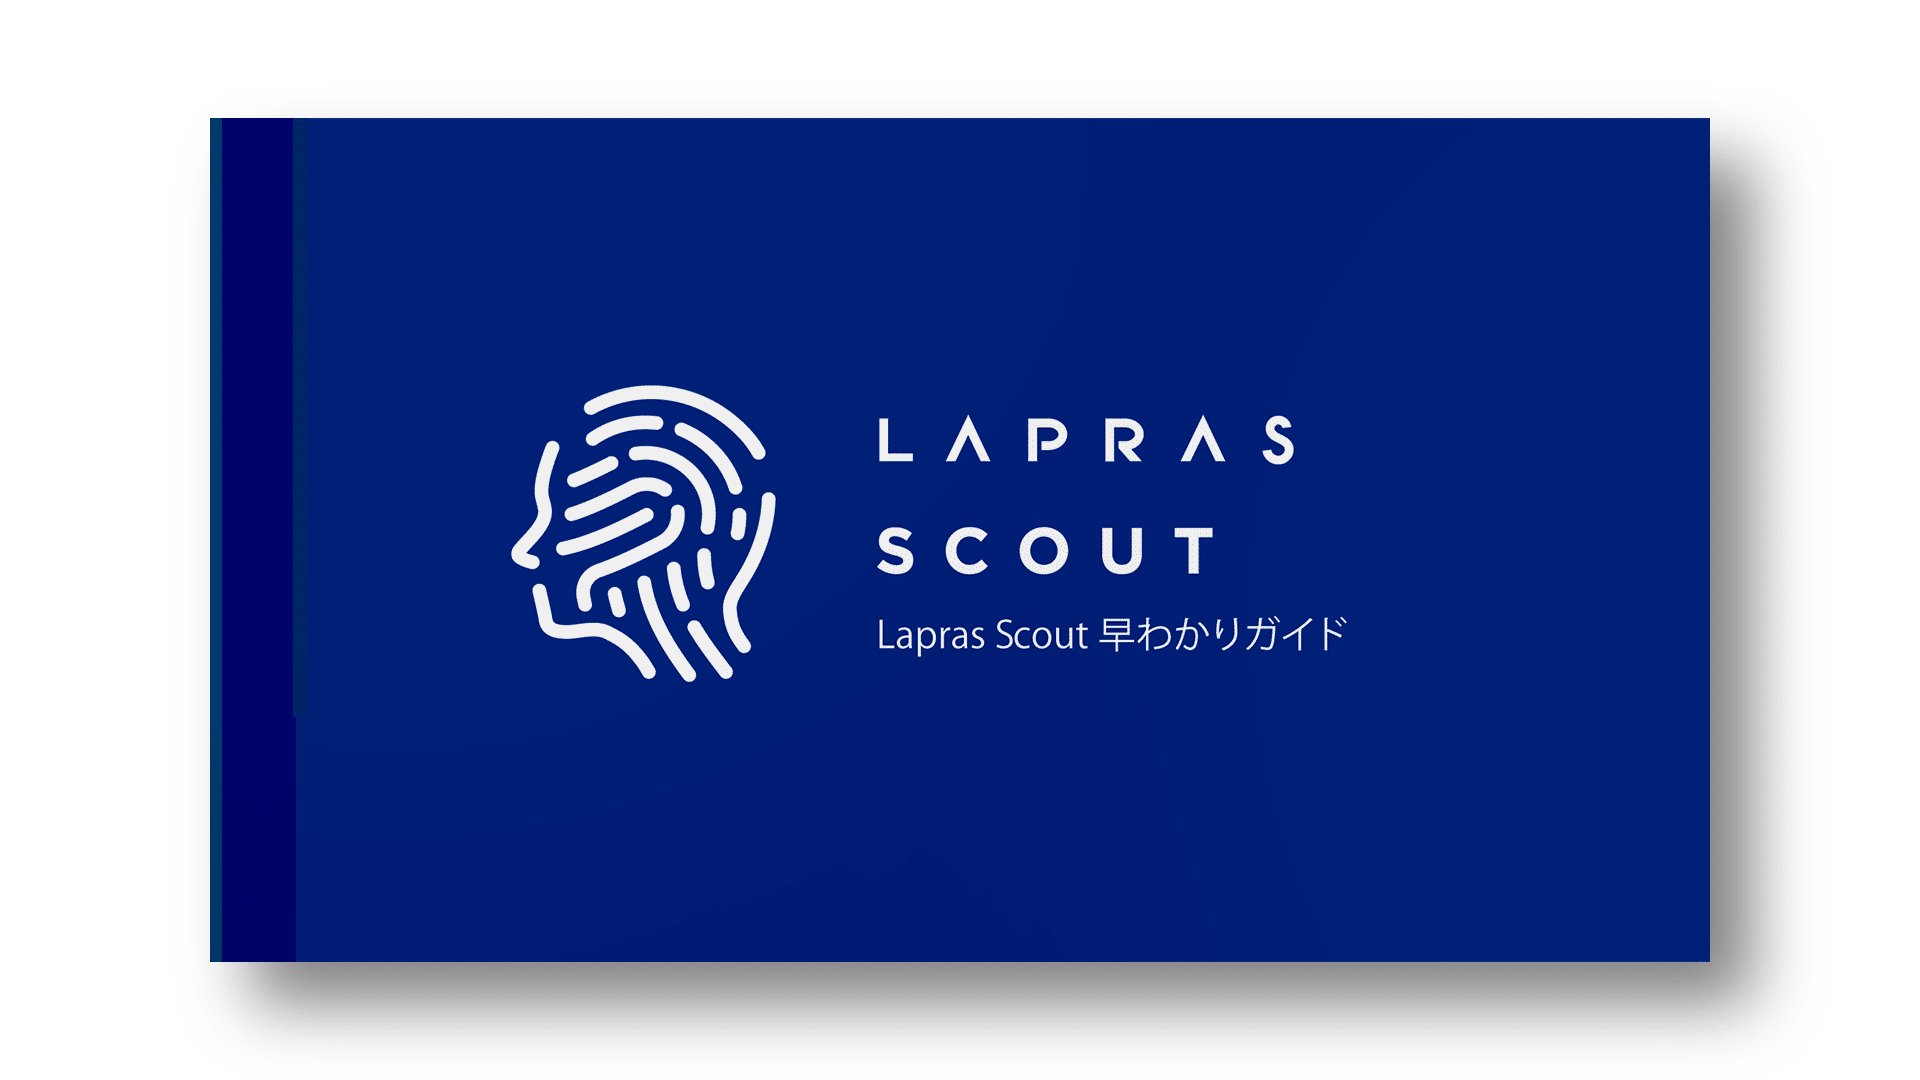 Lapras Scout早わかりガイド